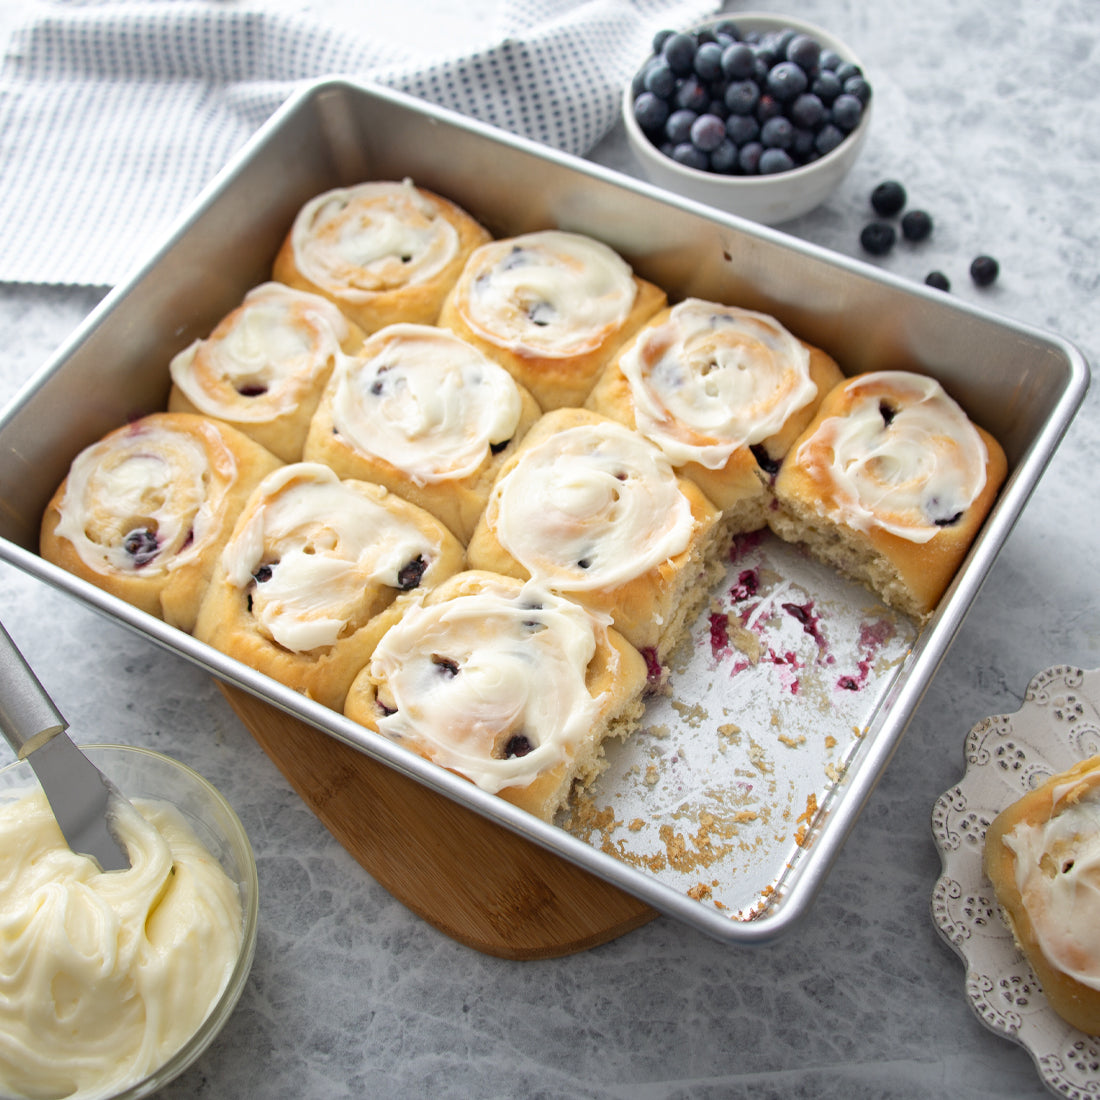 Cake pan with blueberry sweet rolls and cream cheese frosting alongside a bowl of fresh blueberries.